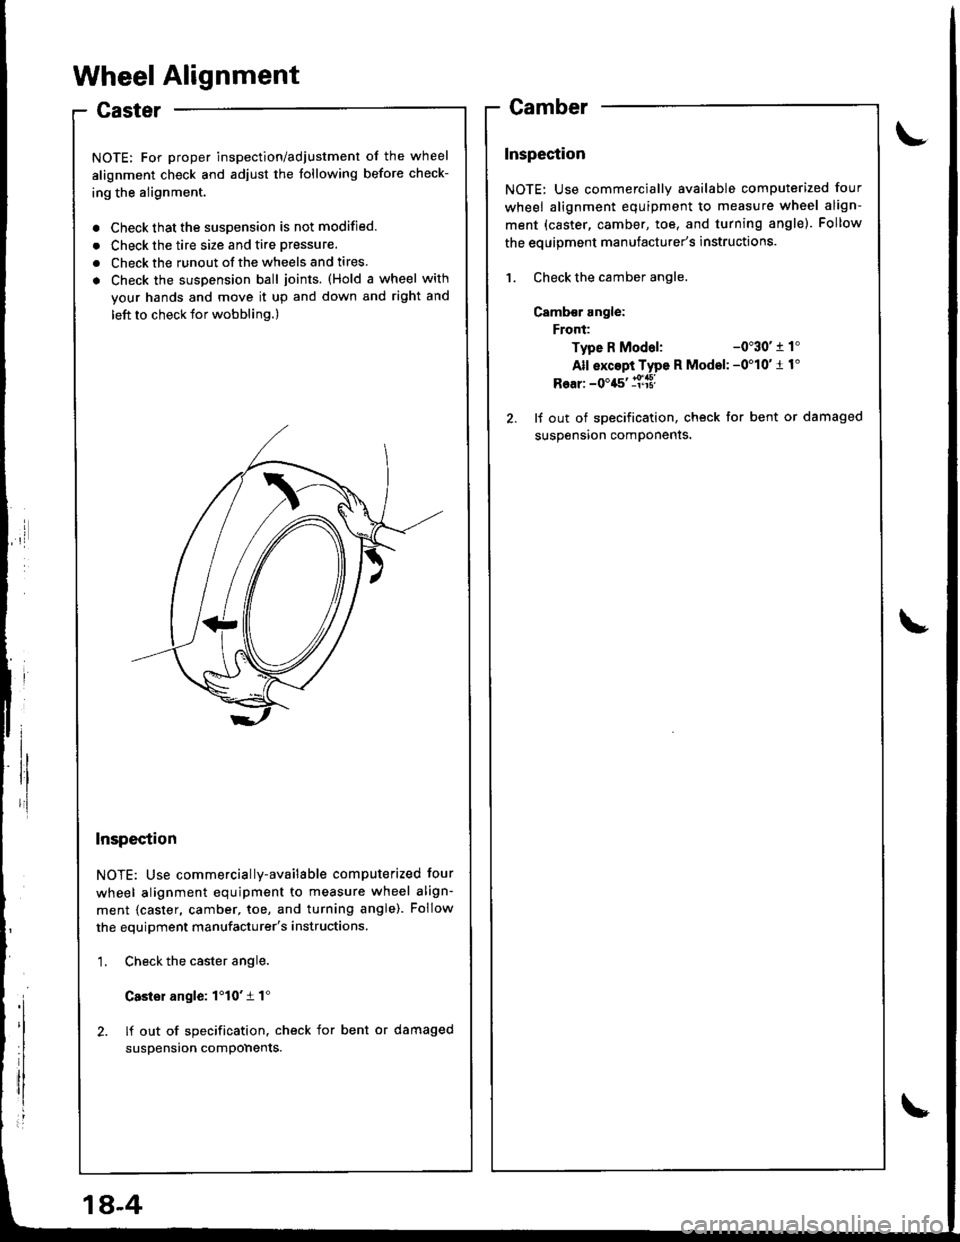 HONDA INTEGRA 1998 4.G Workshop Manual Wheel Alignment
Caster
NOTE: For proper inspection/adjustment of the wheel
alignment check and adjust the following before check-
ing the alignment.
. Check that the susoension is not modified.
. Chec